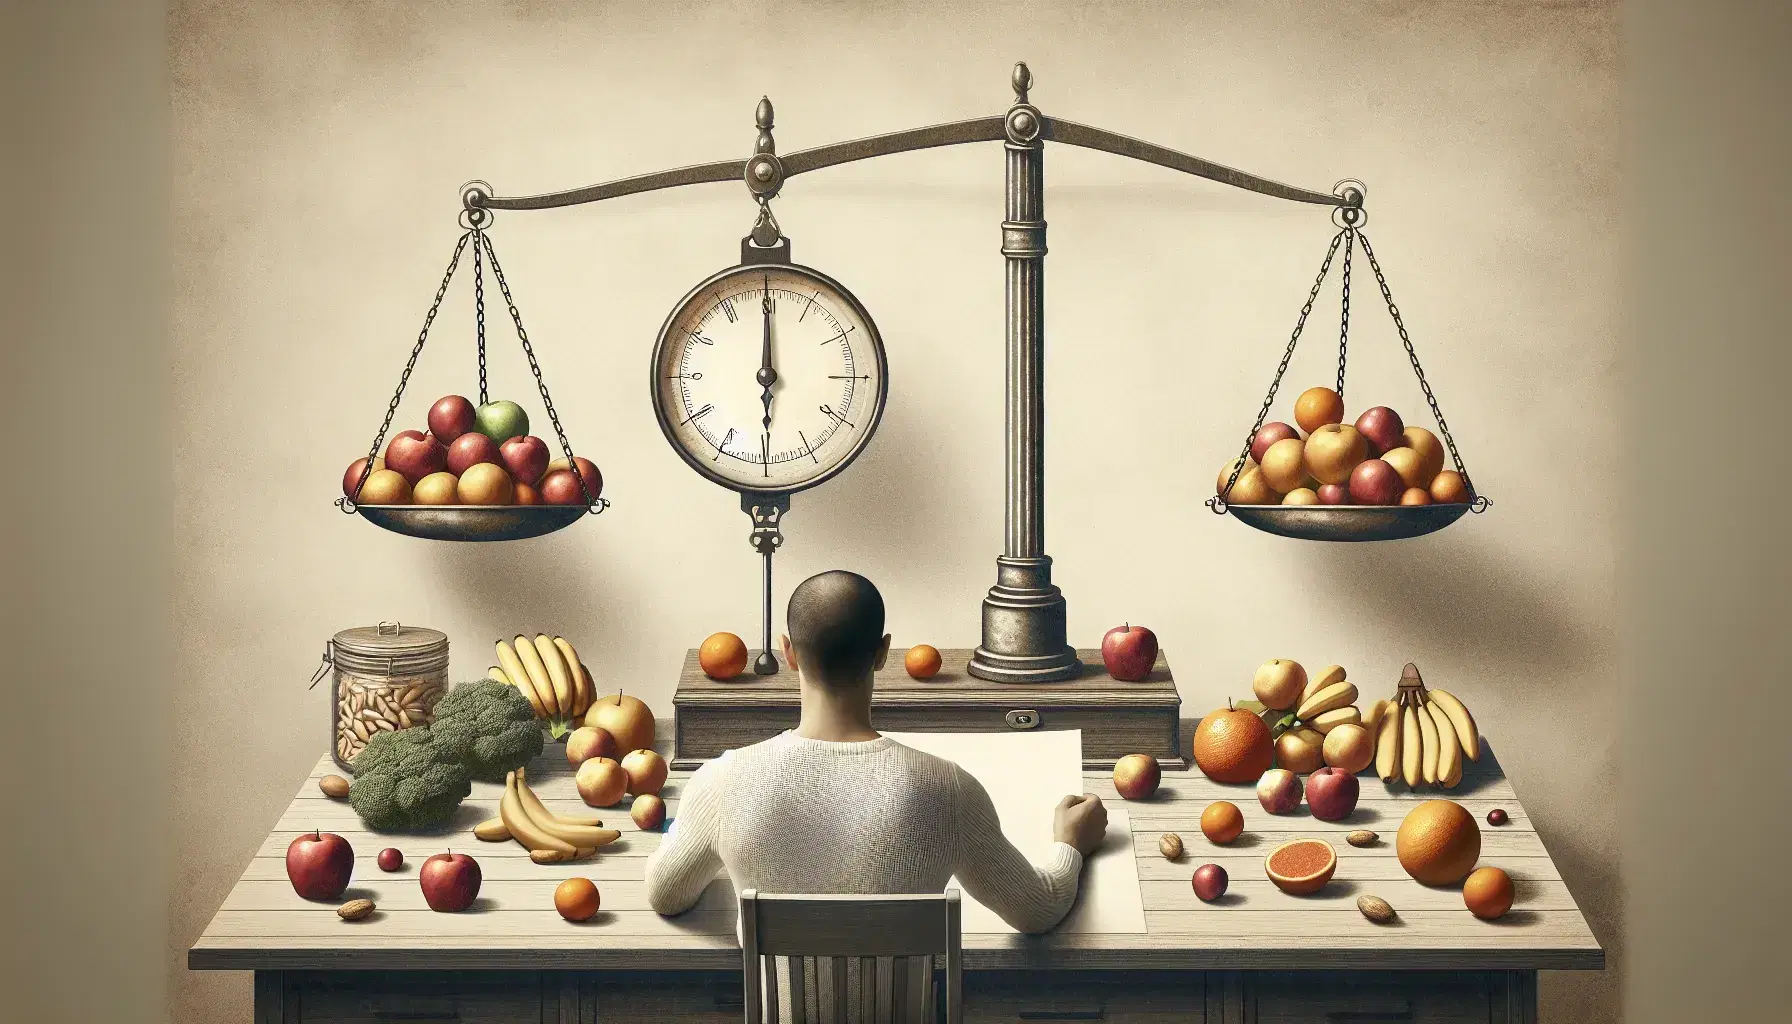 Person sitting at desk in reflection with empty scales, clock showing 10:10 and assorted fresh fruit neatly arranged.